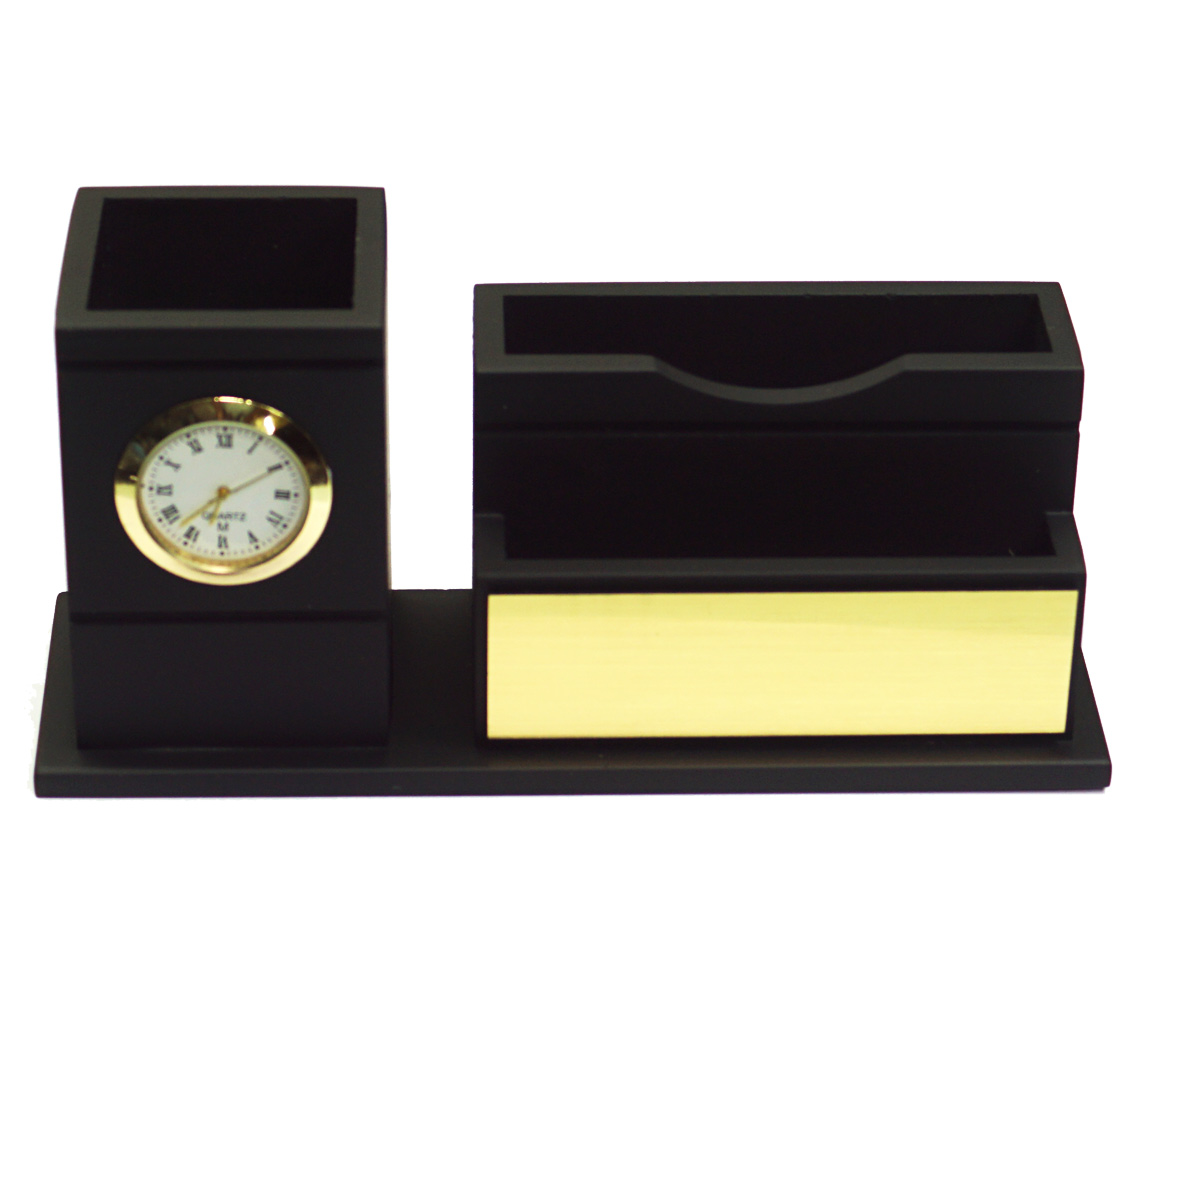 penhouse.in Customized Plastic Pen Stand And Card Holder With Clock SKU 87177